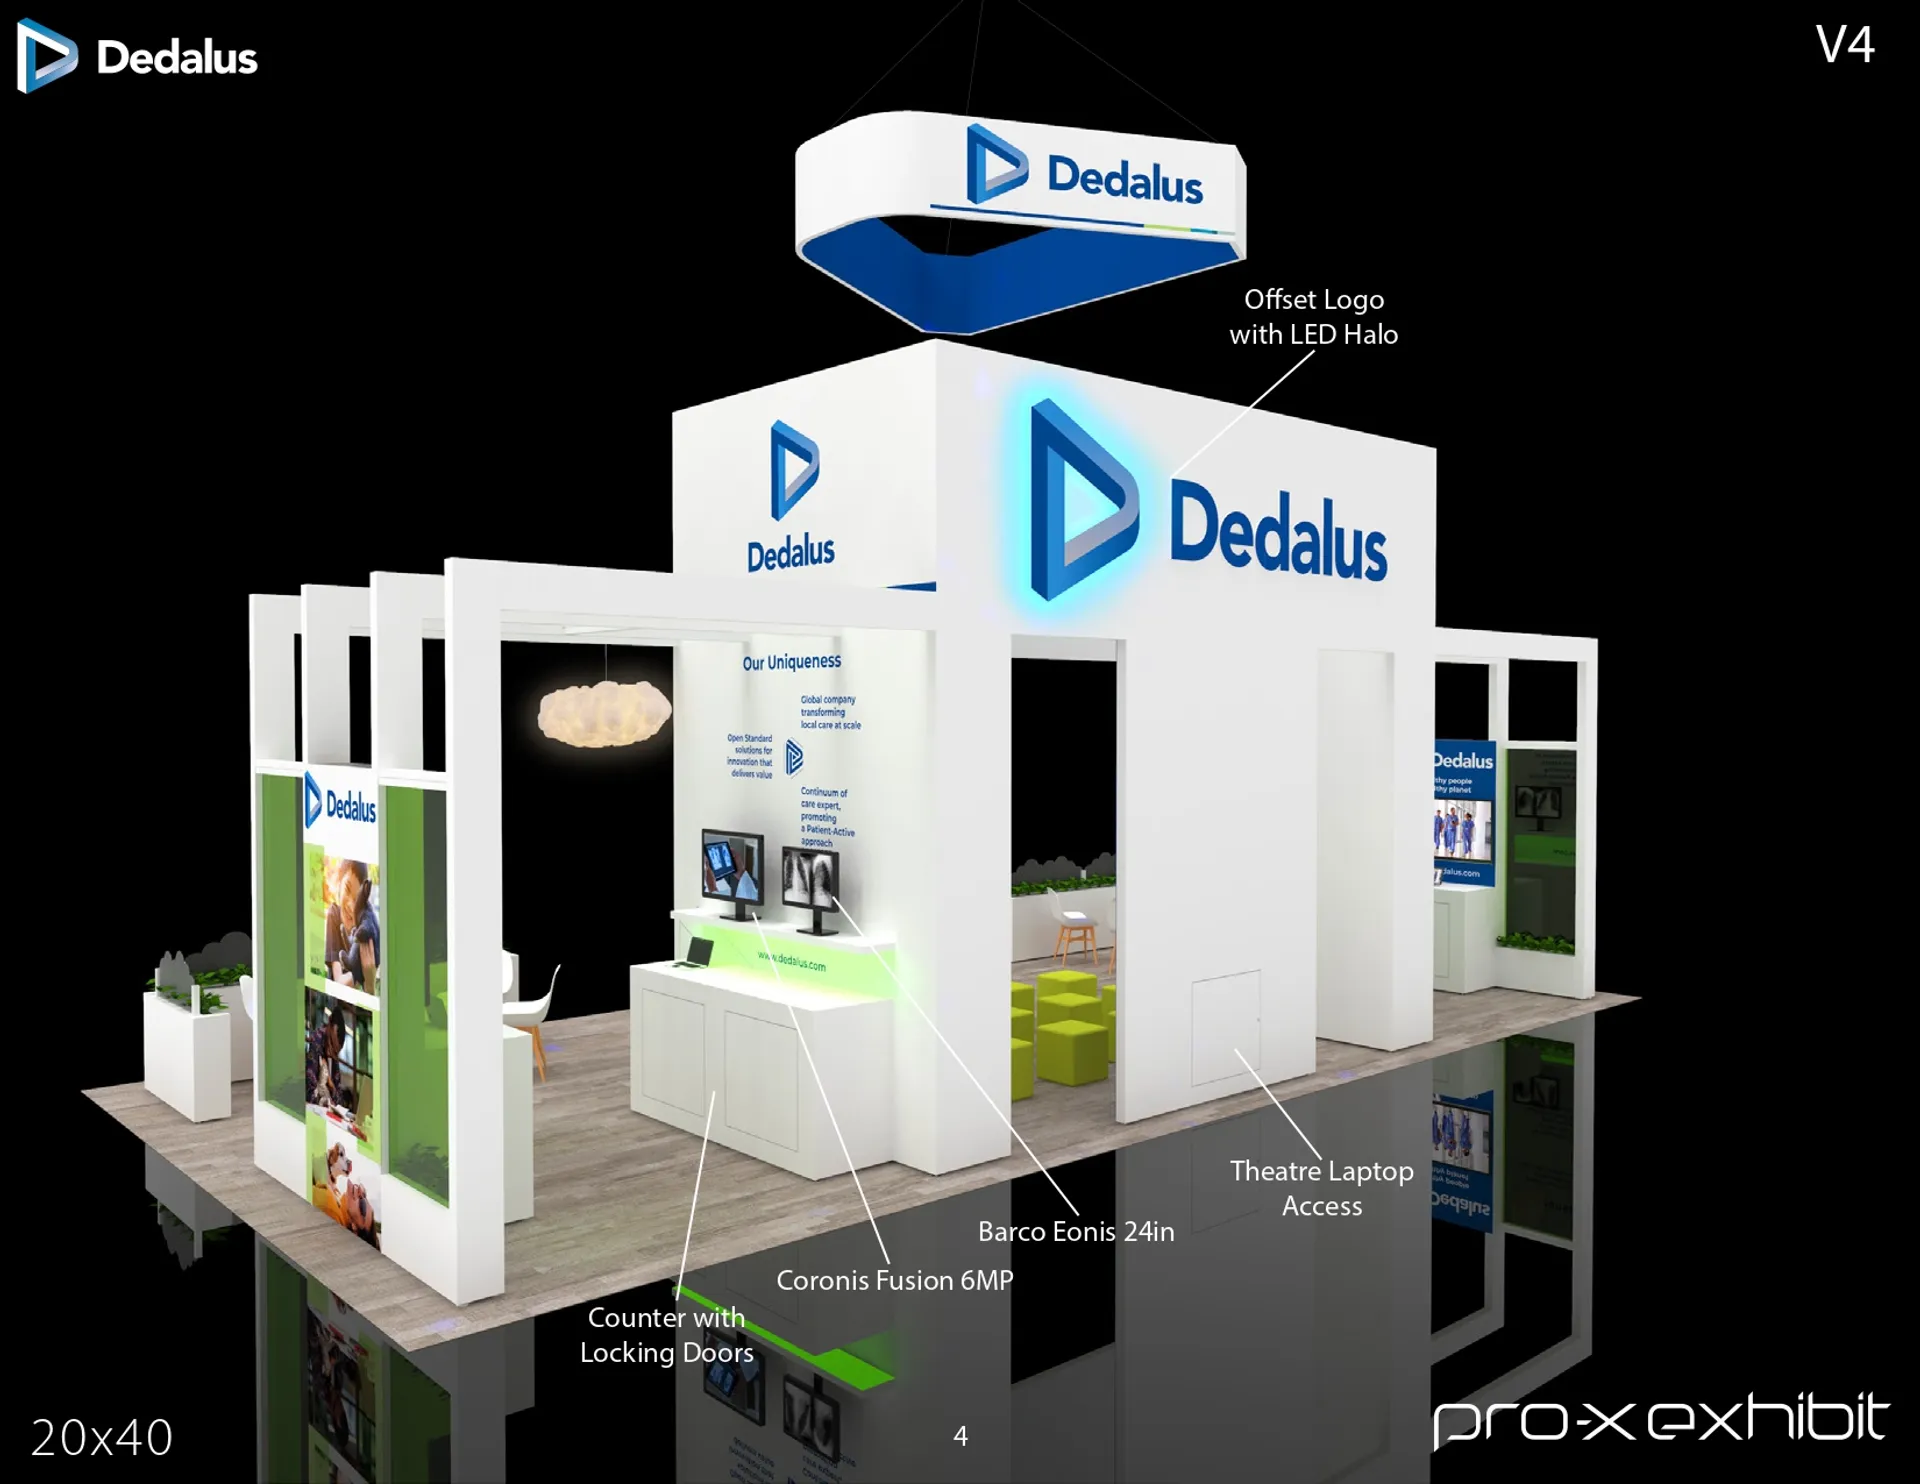 booth-design-projects/Pro-X Exhibits/2024-03-22-20x40-ISLAND-Project-50/DEDALUS_RSNA_20x40_V4-4_page-0001-827ya.jpg